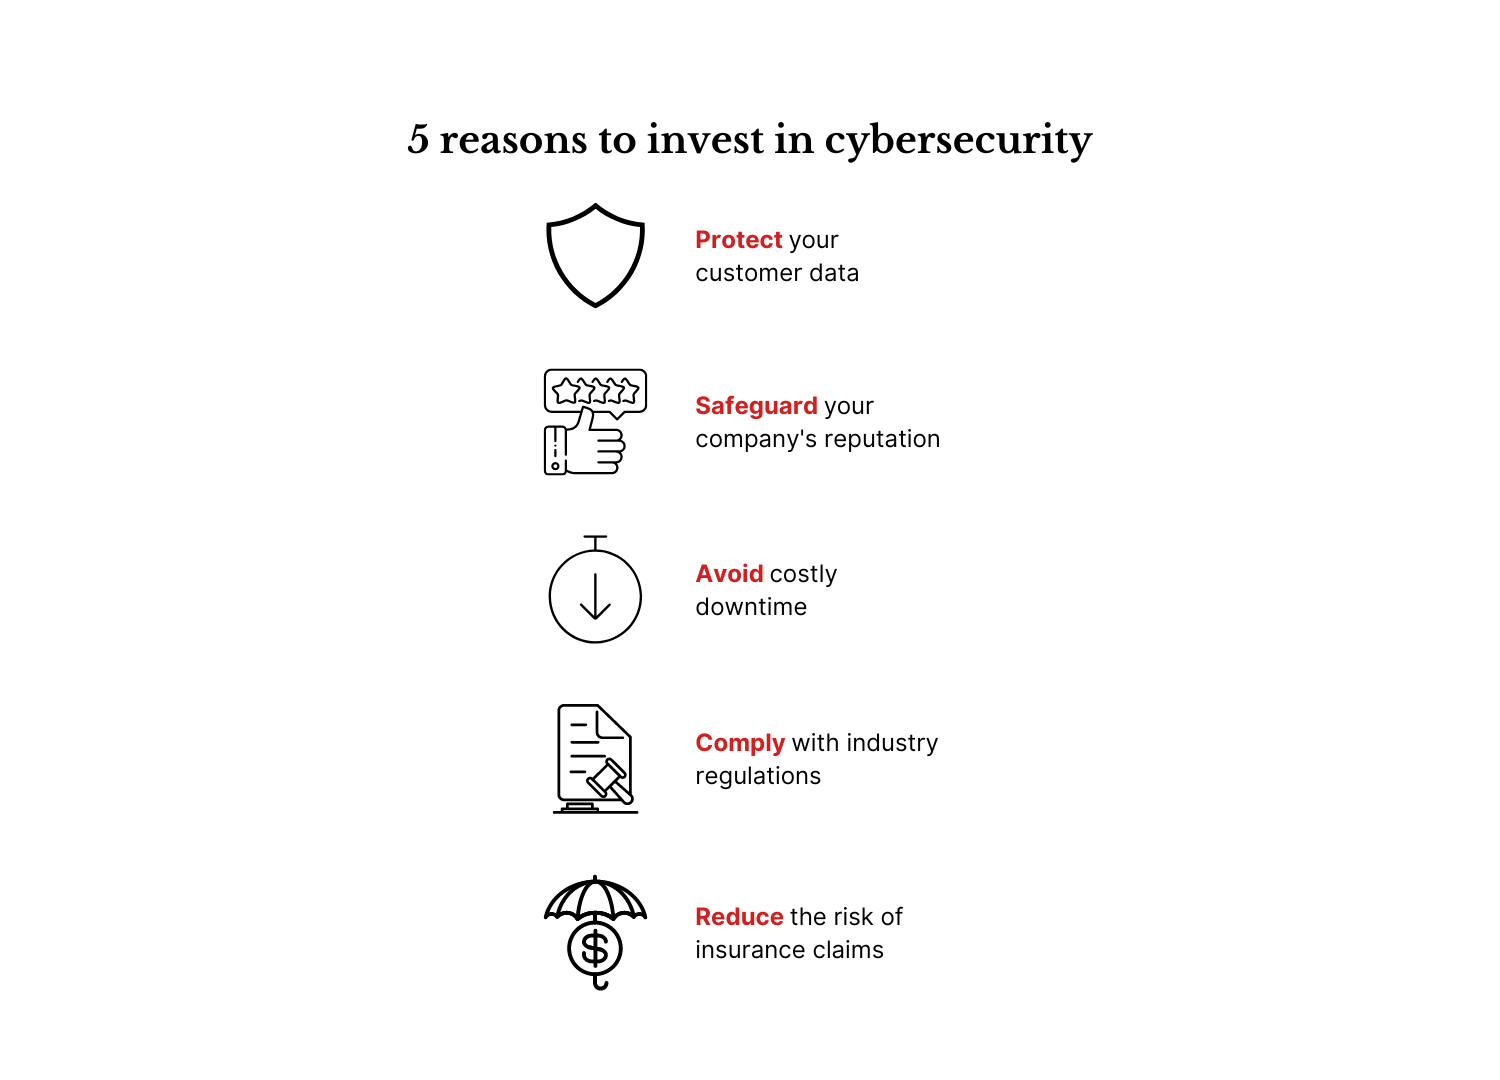 An infographic showing 5 reasons to invest in cybersecurity.